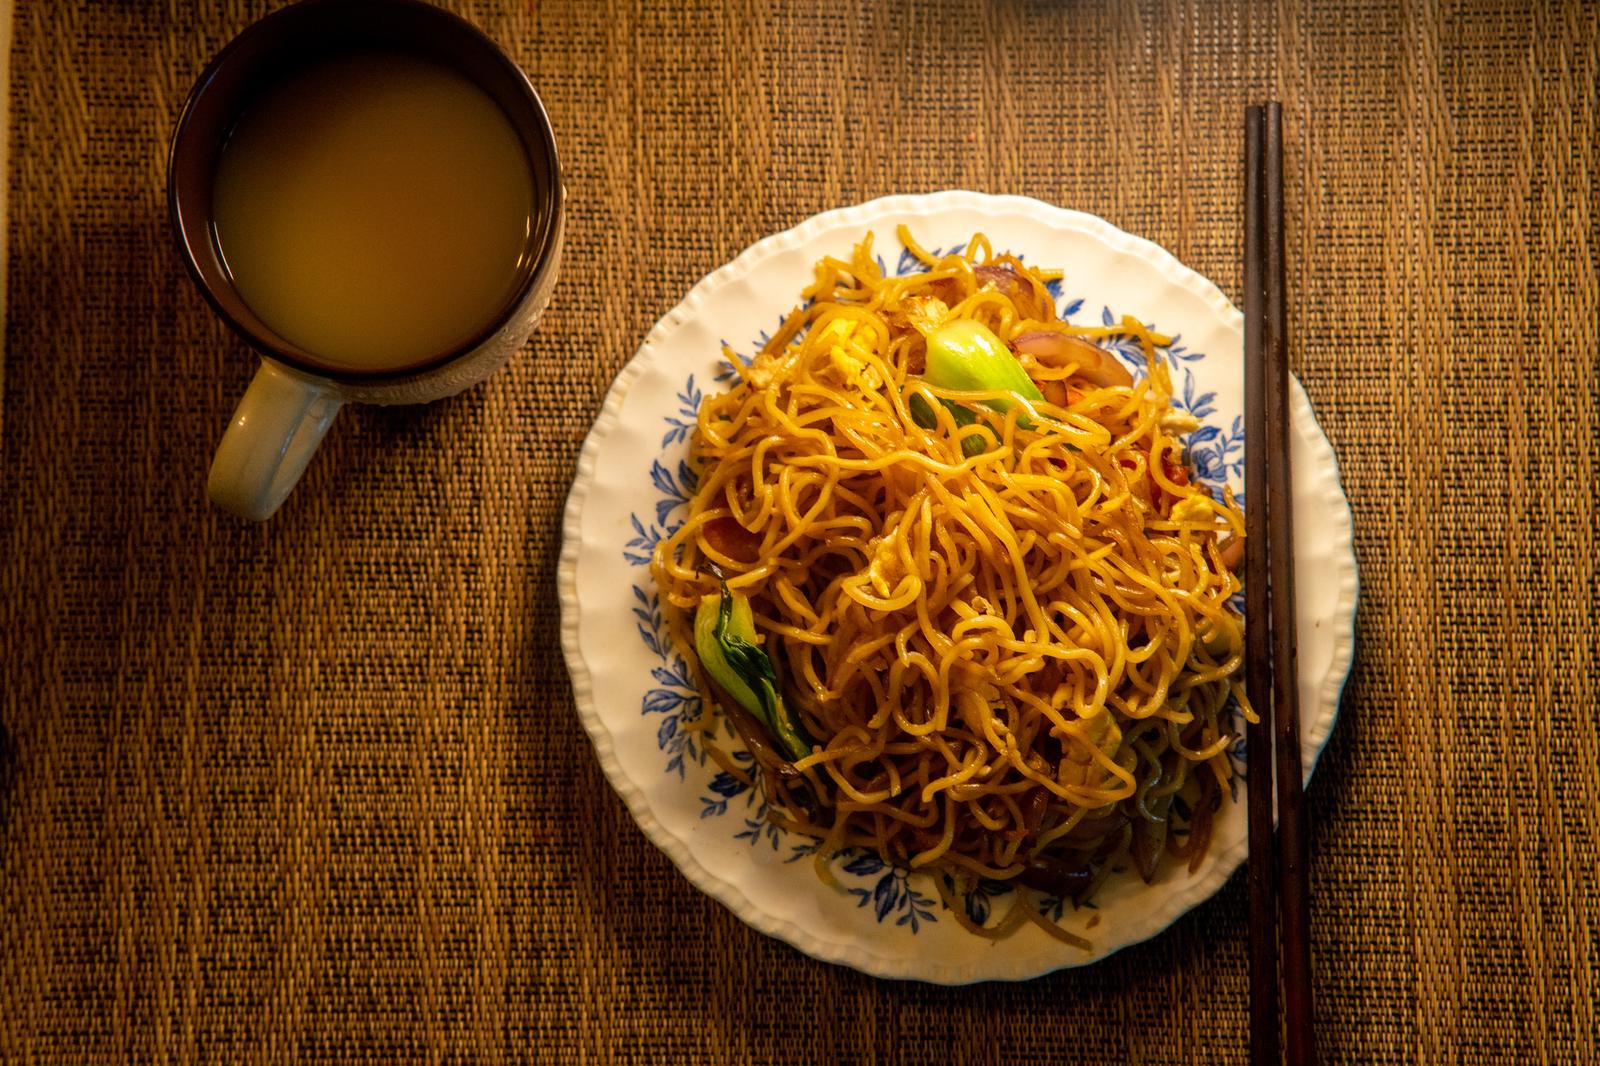 Take a Trip to New York City to Find Out Where You’ll Meet Your Soulmate Noodles